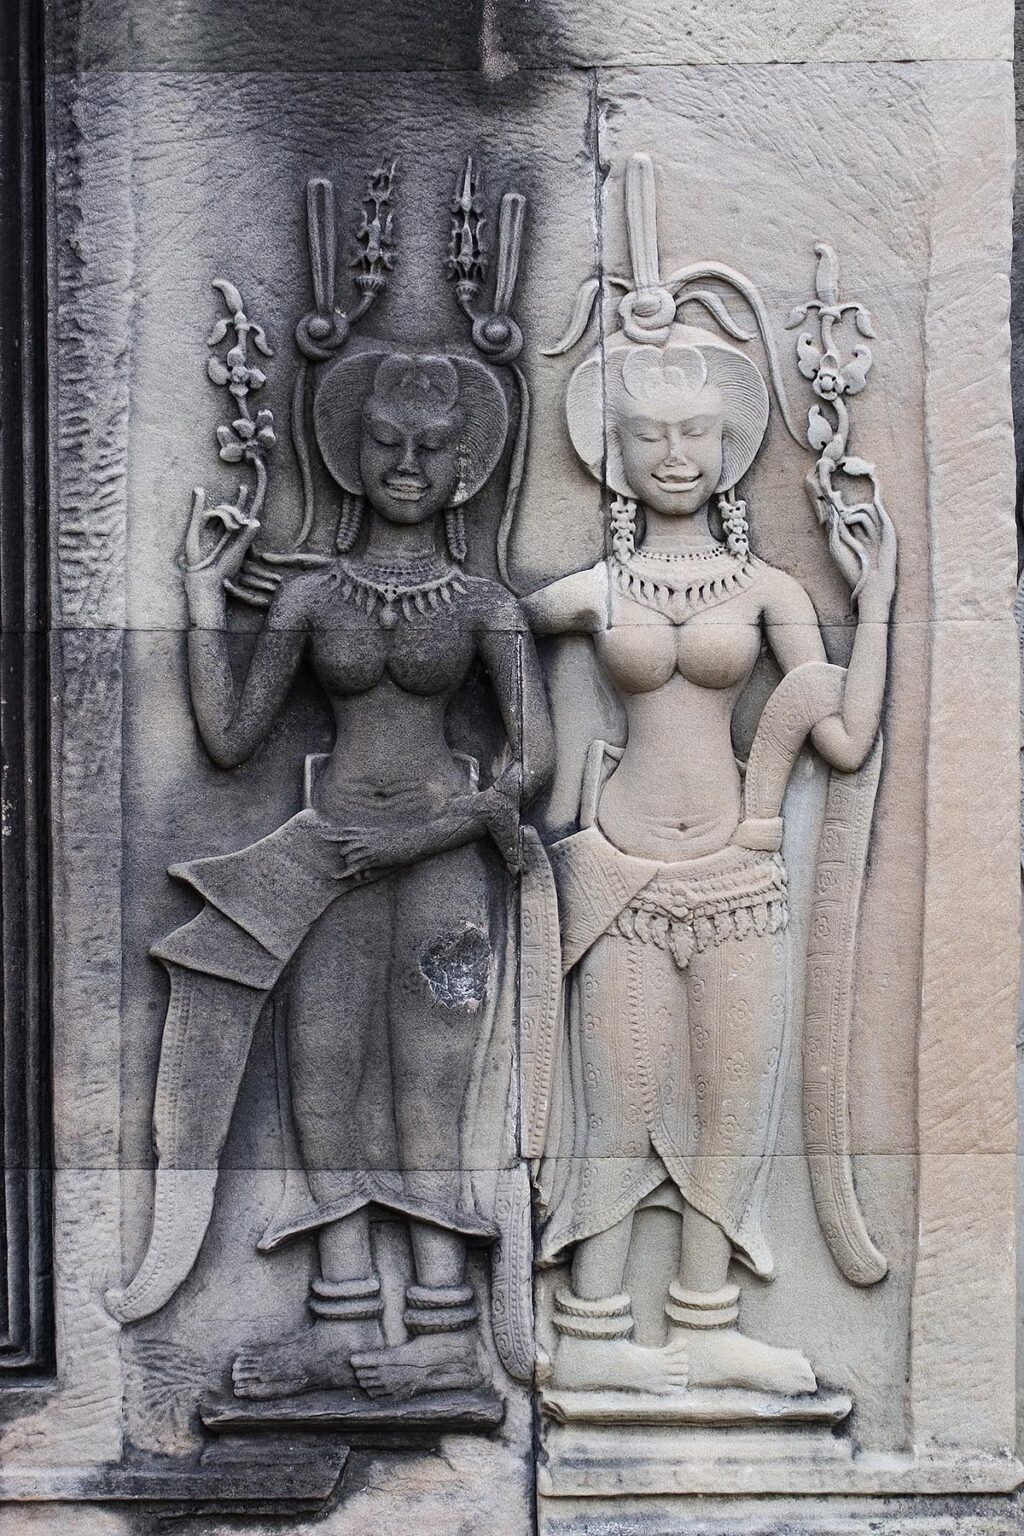 Stone carved bas relief of two smiling Apsaras (celestial maidens) at Angkor Wat, built in the 11th century by Suryavarman the 2nd - Cambodia